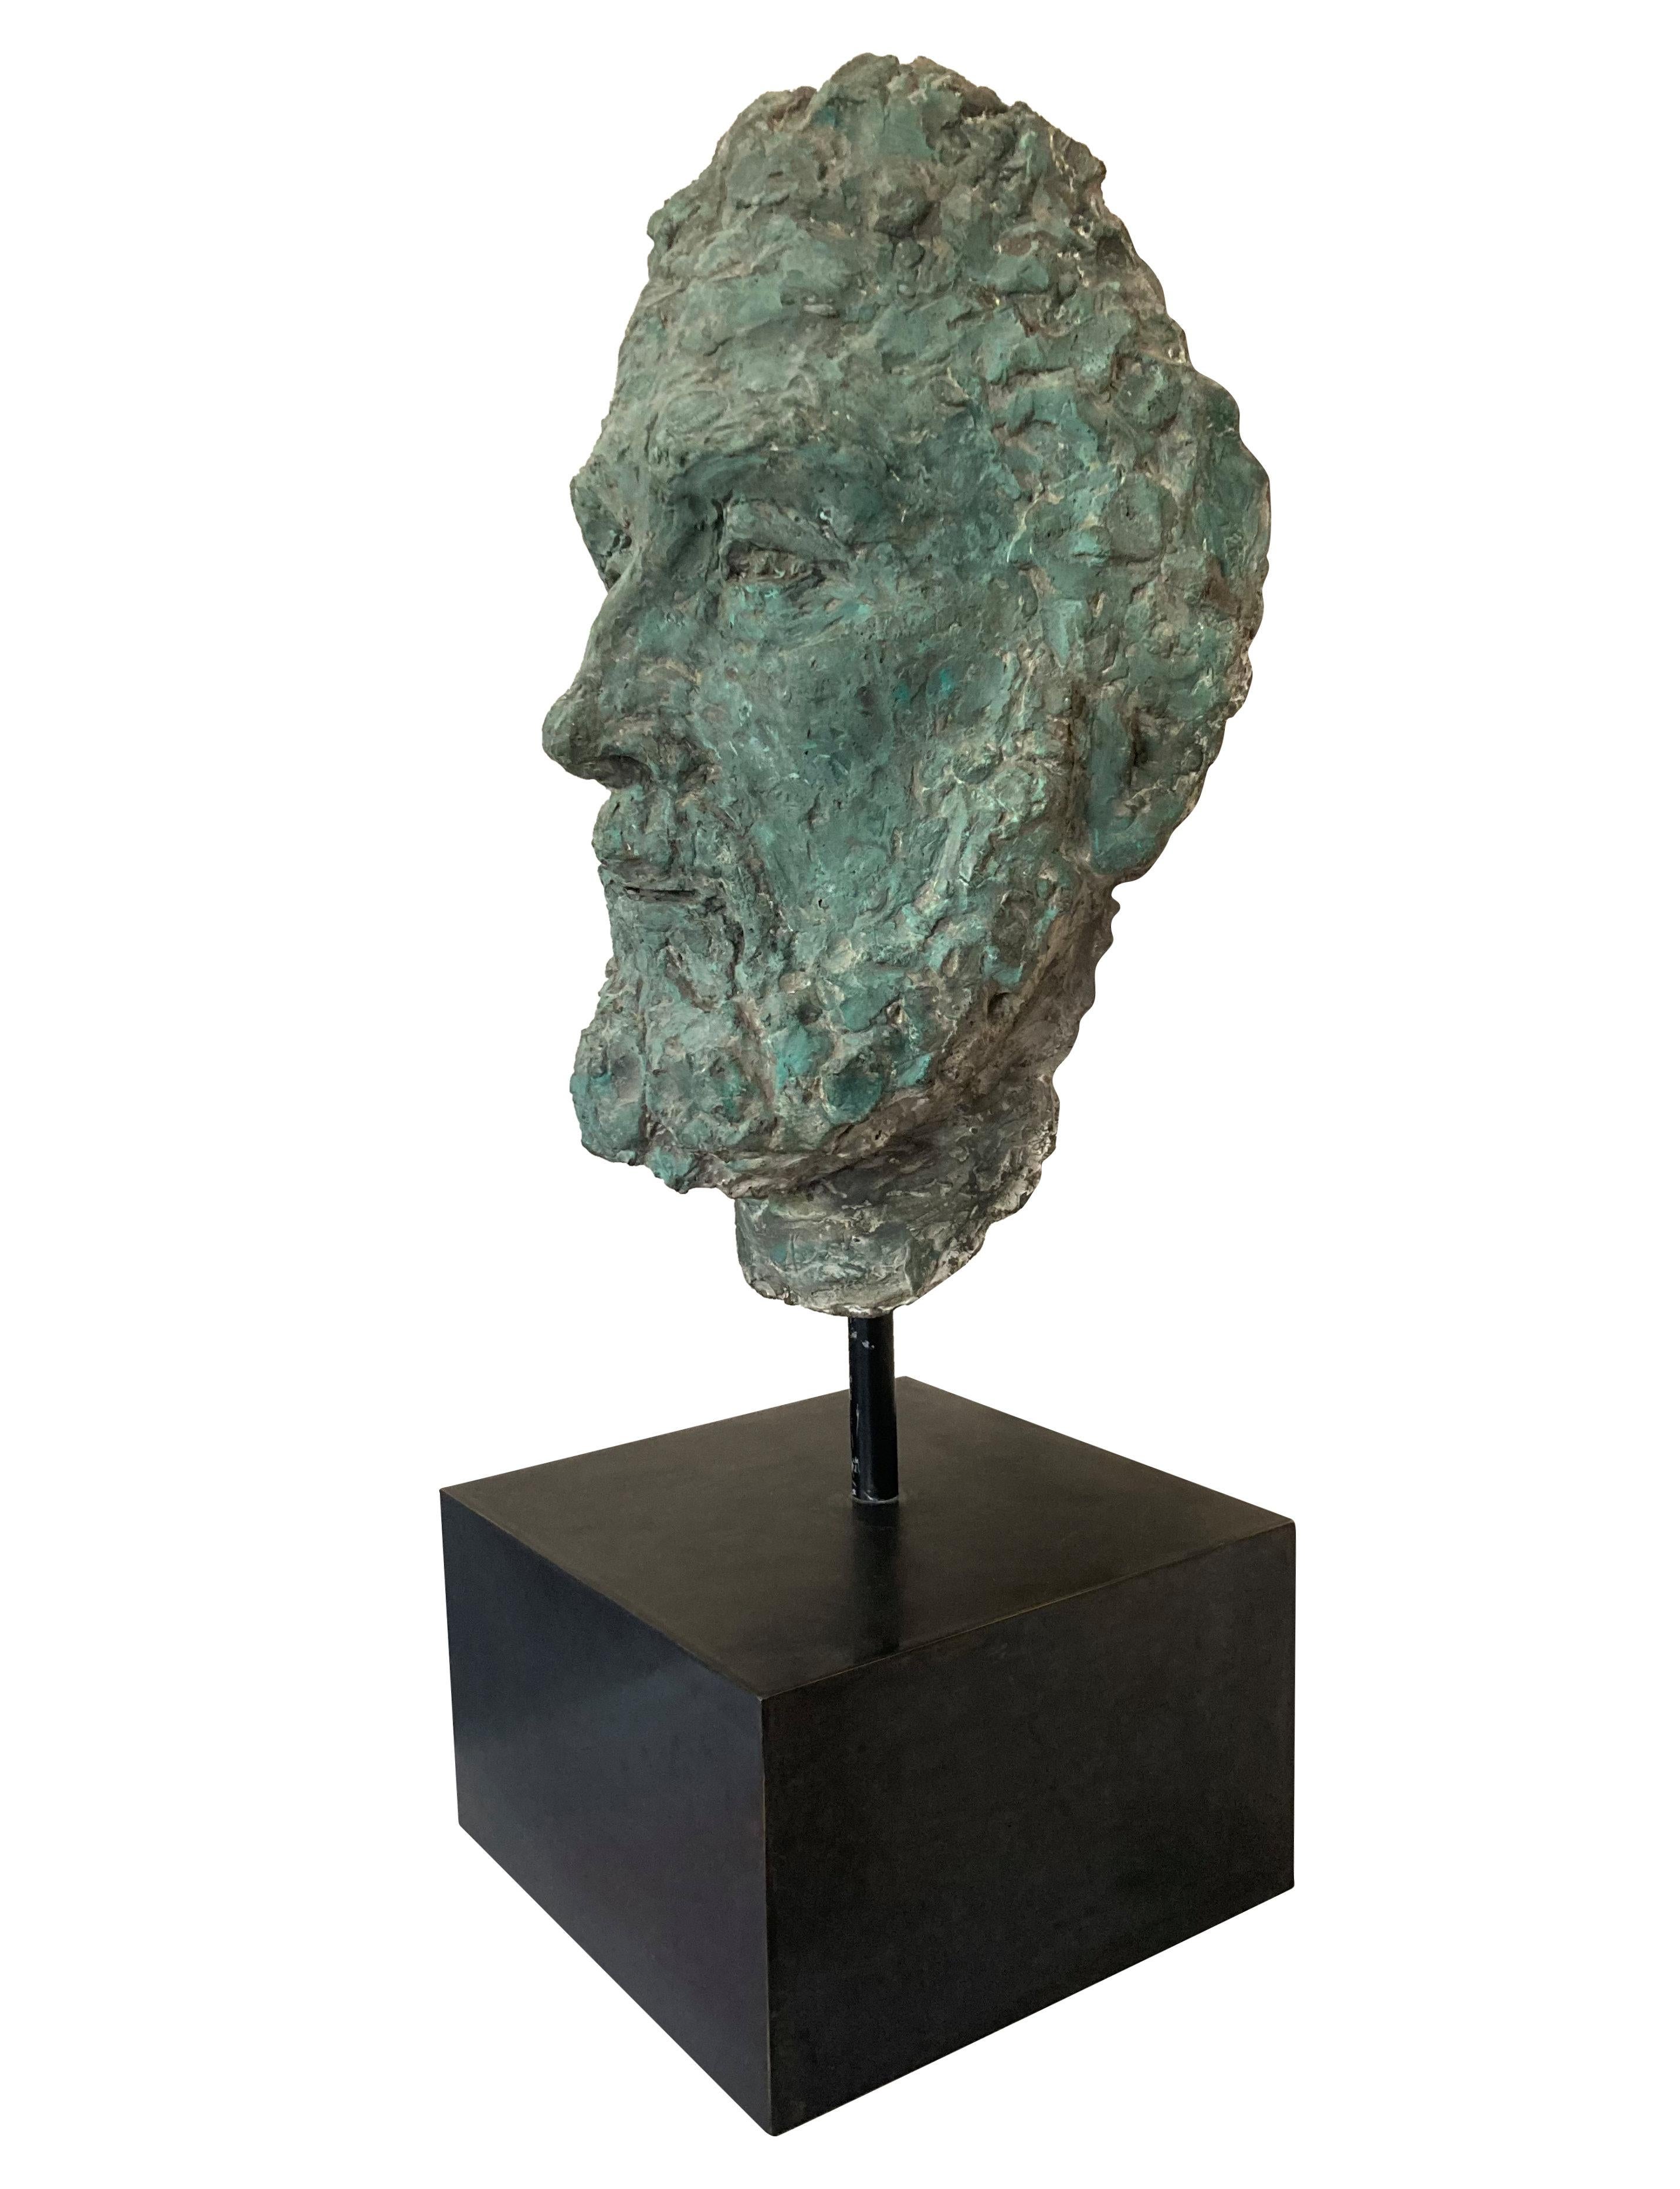 A large patinated (bronze powder) clay head of Zeus, on a bronzed metal base.